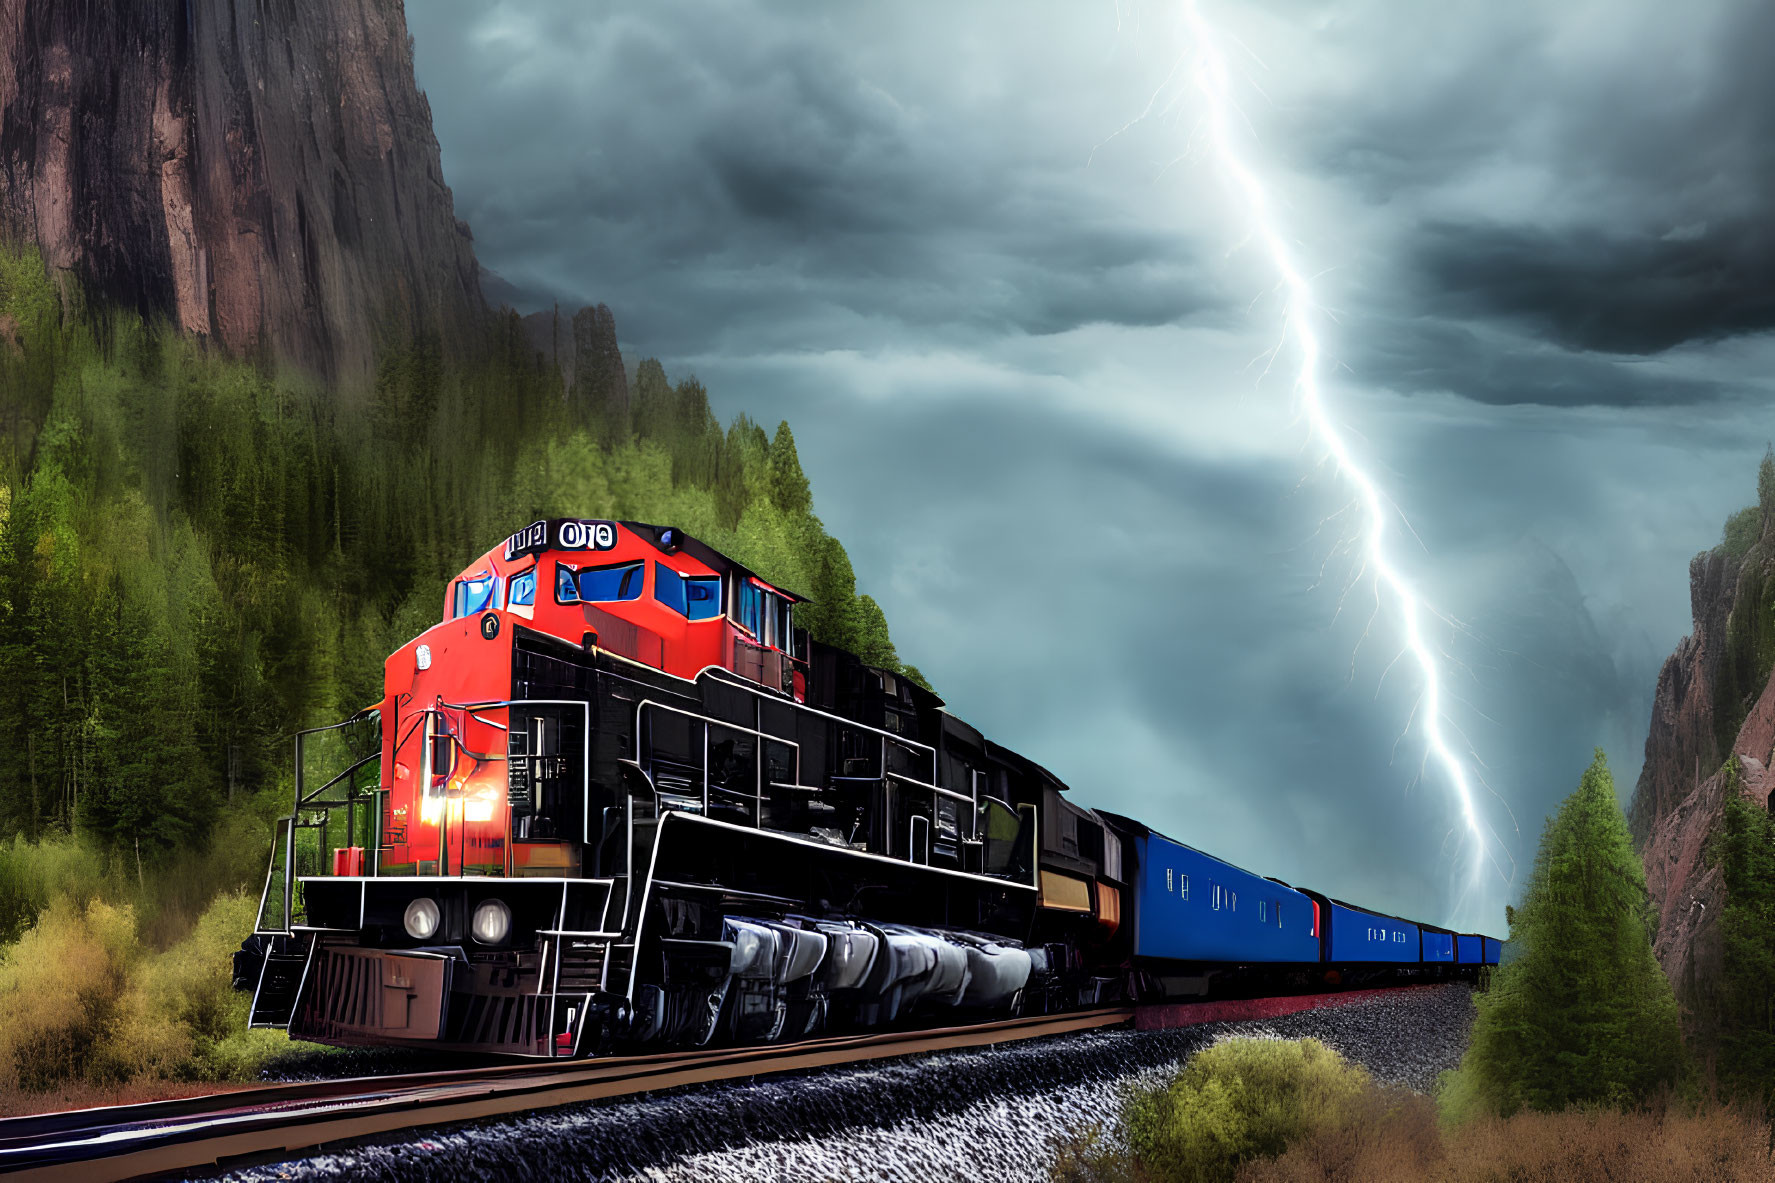 Vibrant red and black cargo train struck by lightning in forest setting